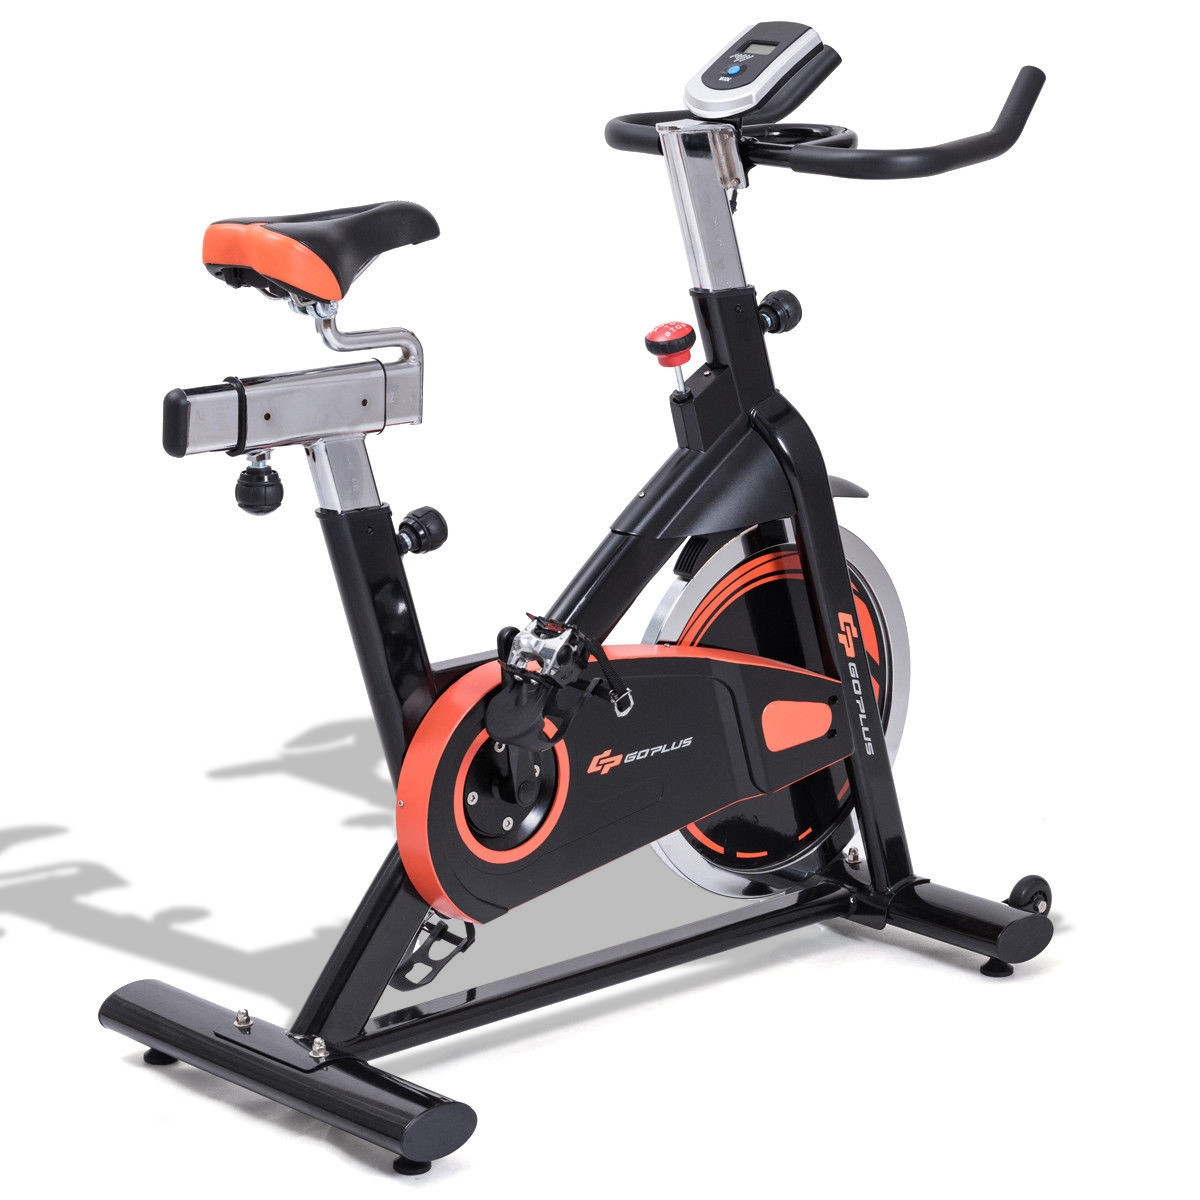 goplus exercise bike cycle trainer indoor workout cardio fitness bicycle stationary